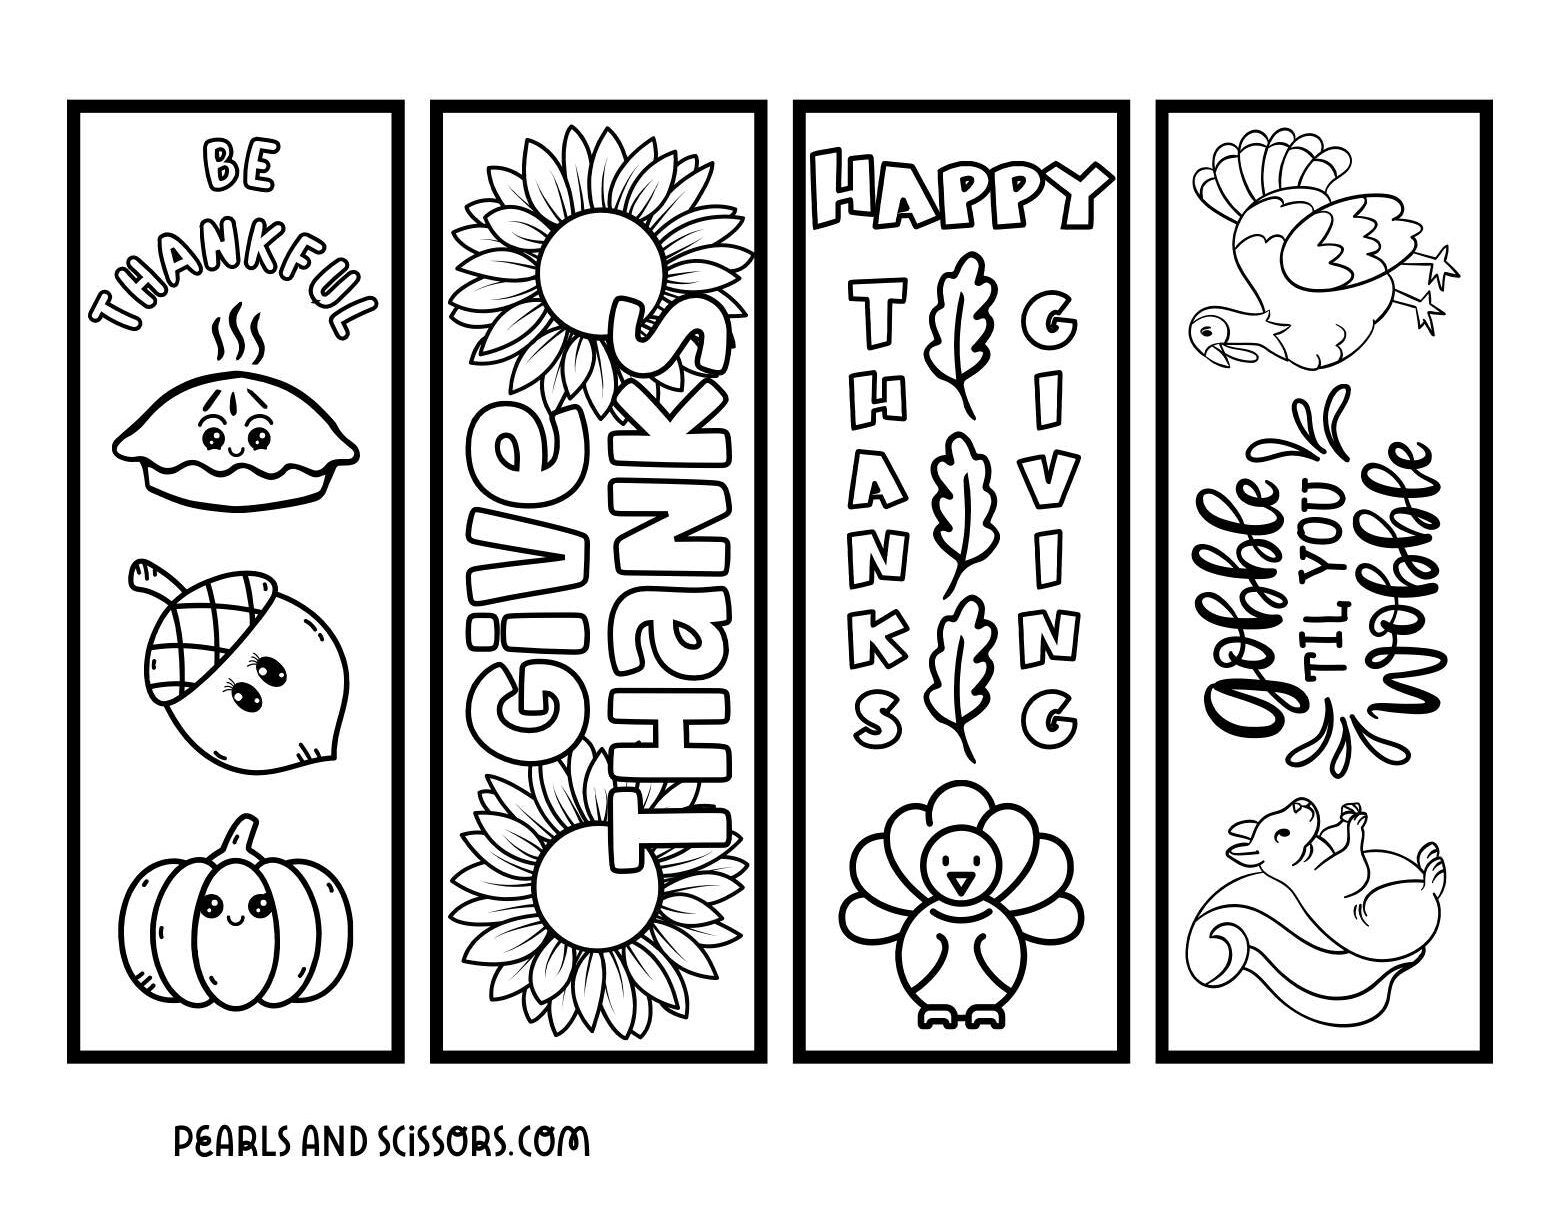 Thanksgiving printables of bookmarks for coloring.